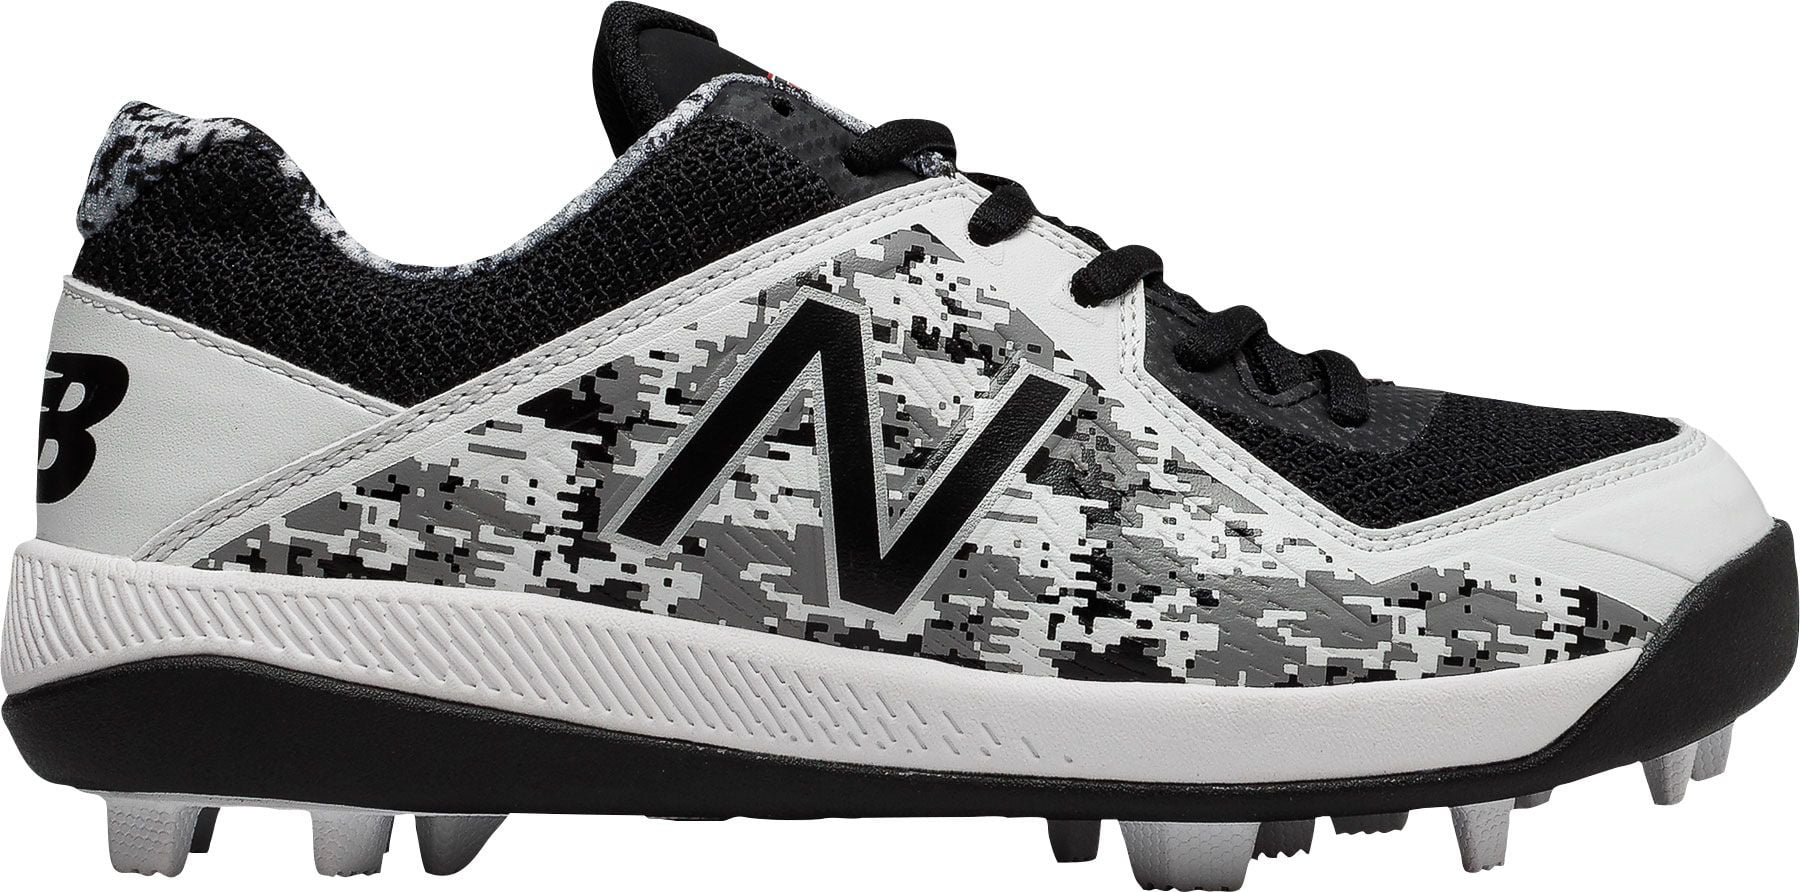 dustin pedroia cleats